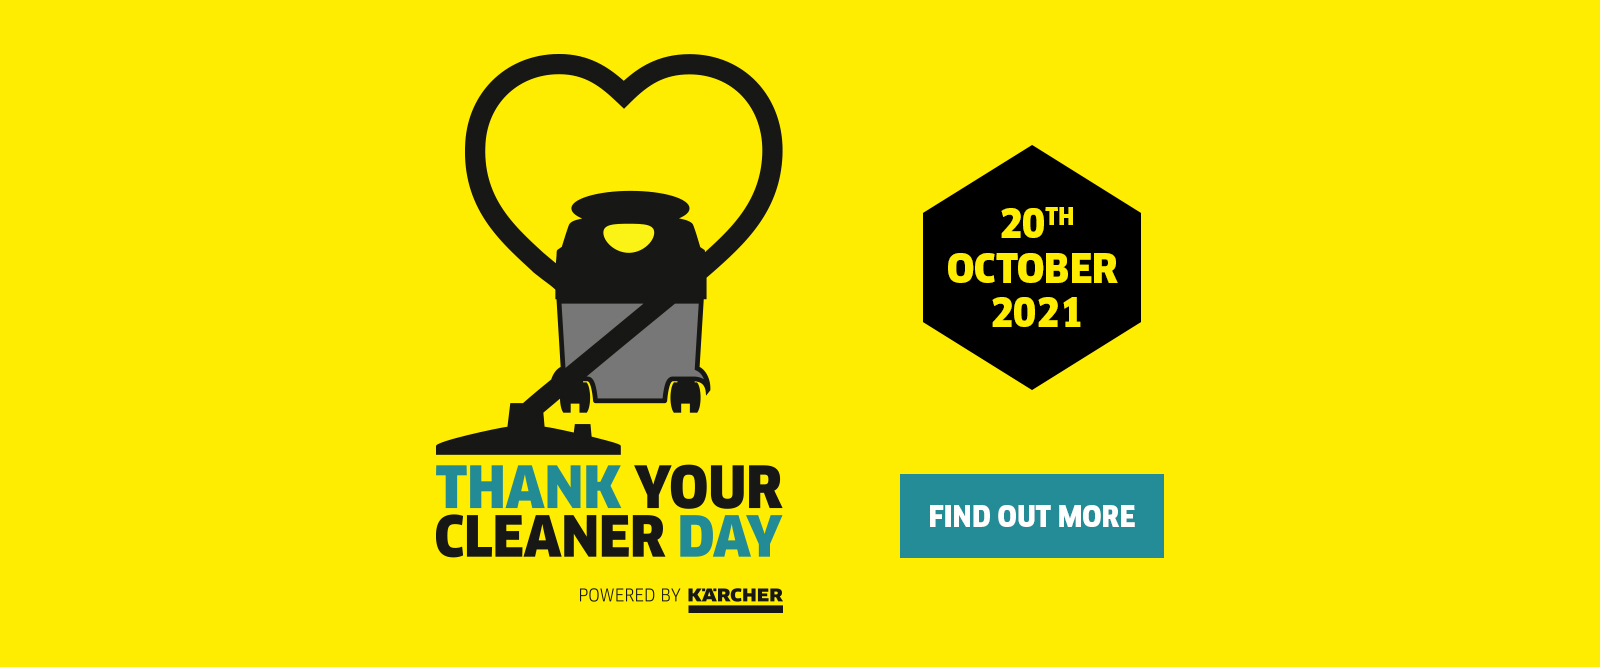 Thank your cleaner day 2021